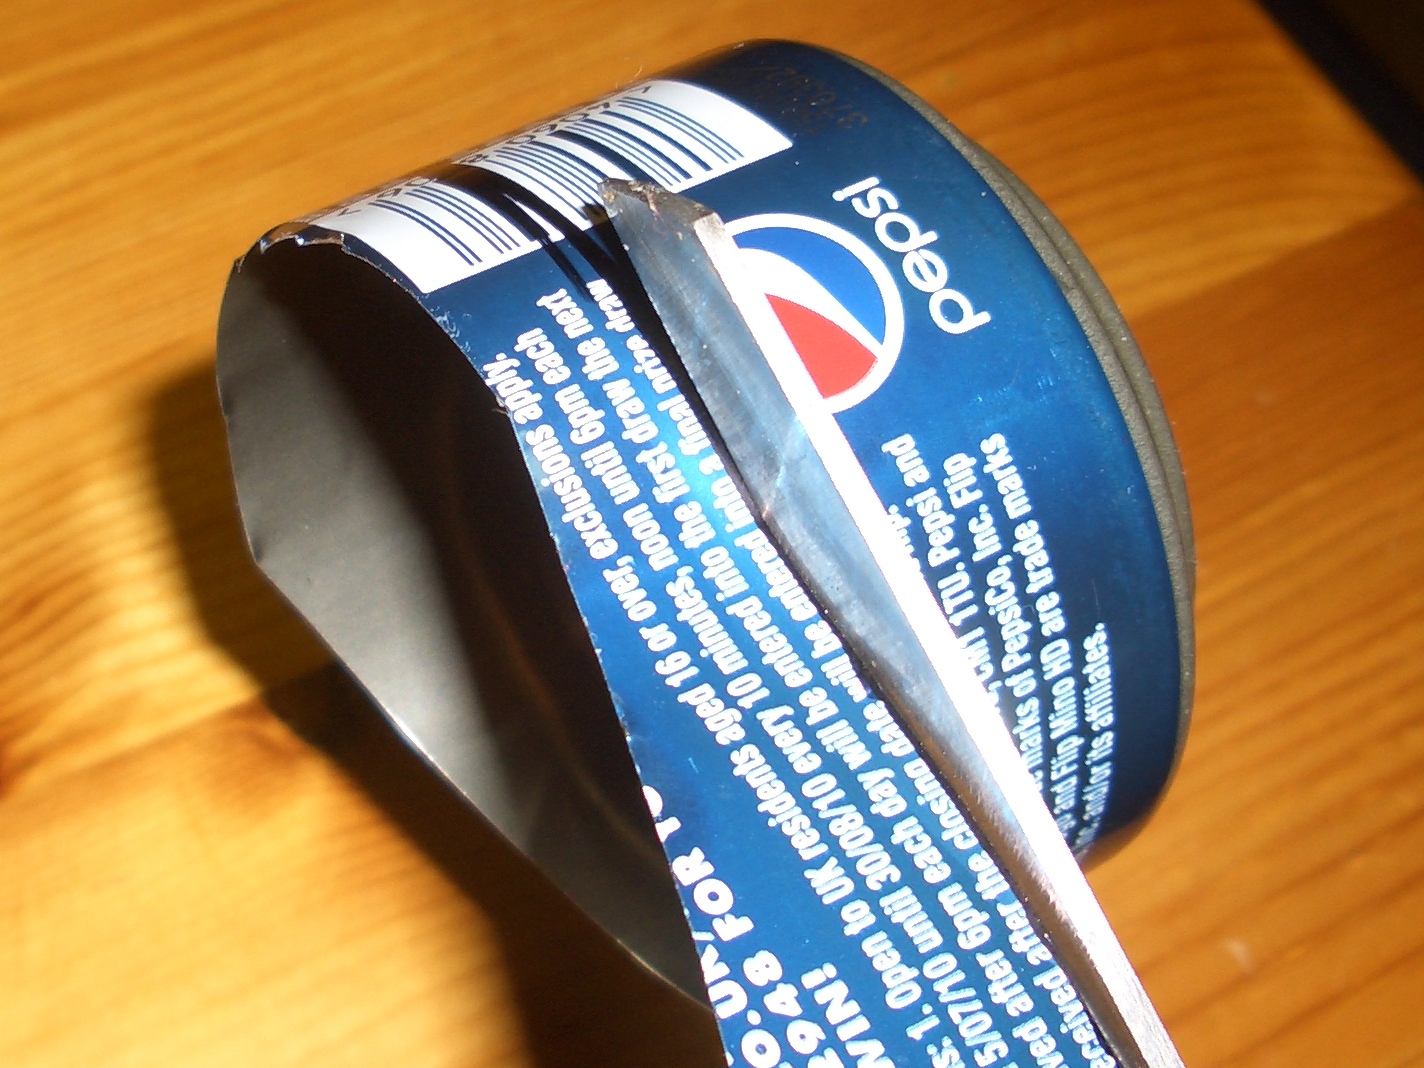 Using Scissors to cut cans down